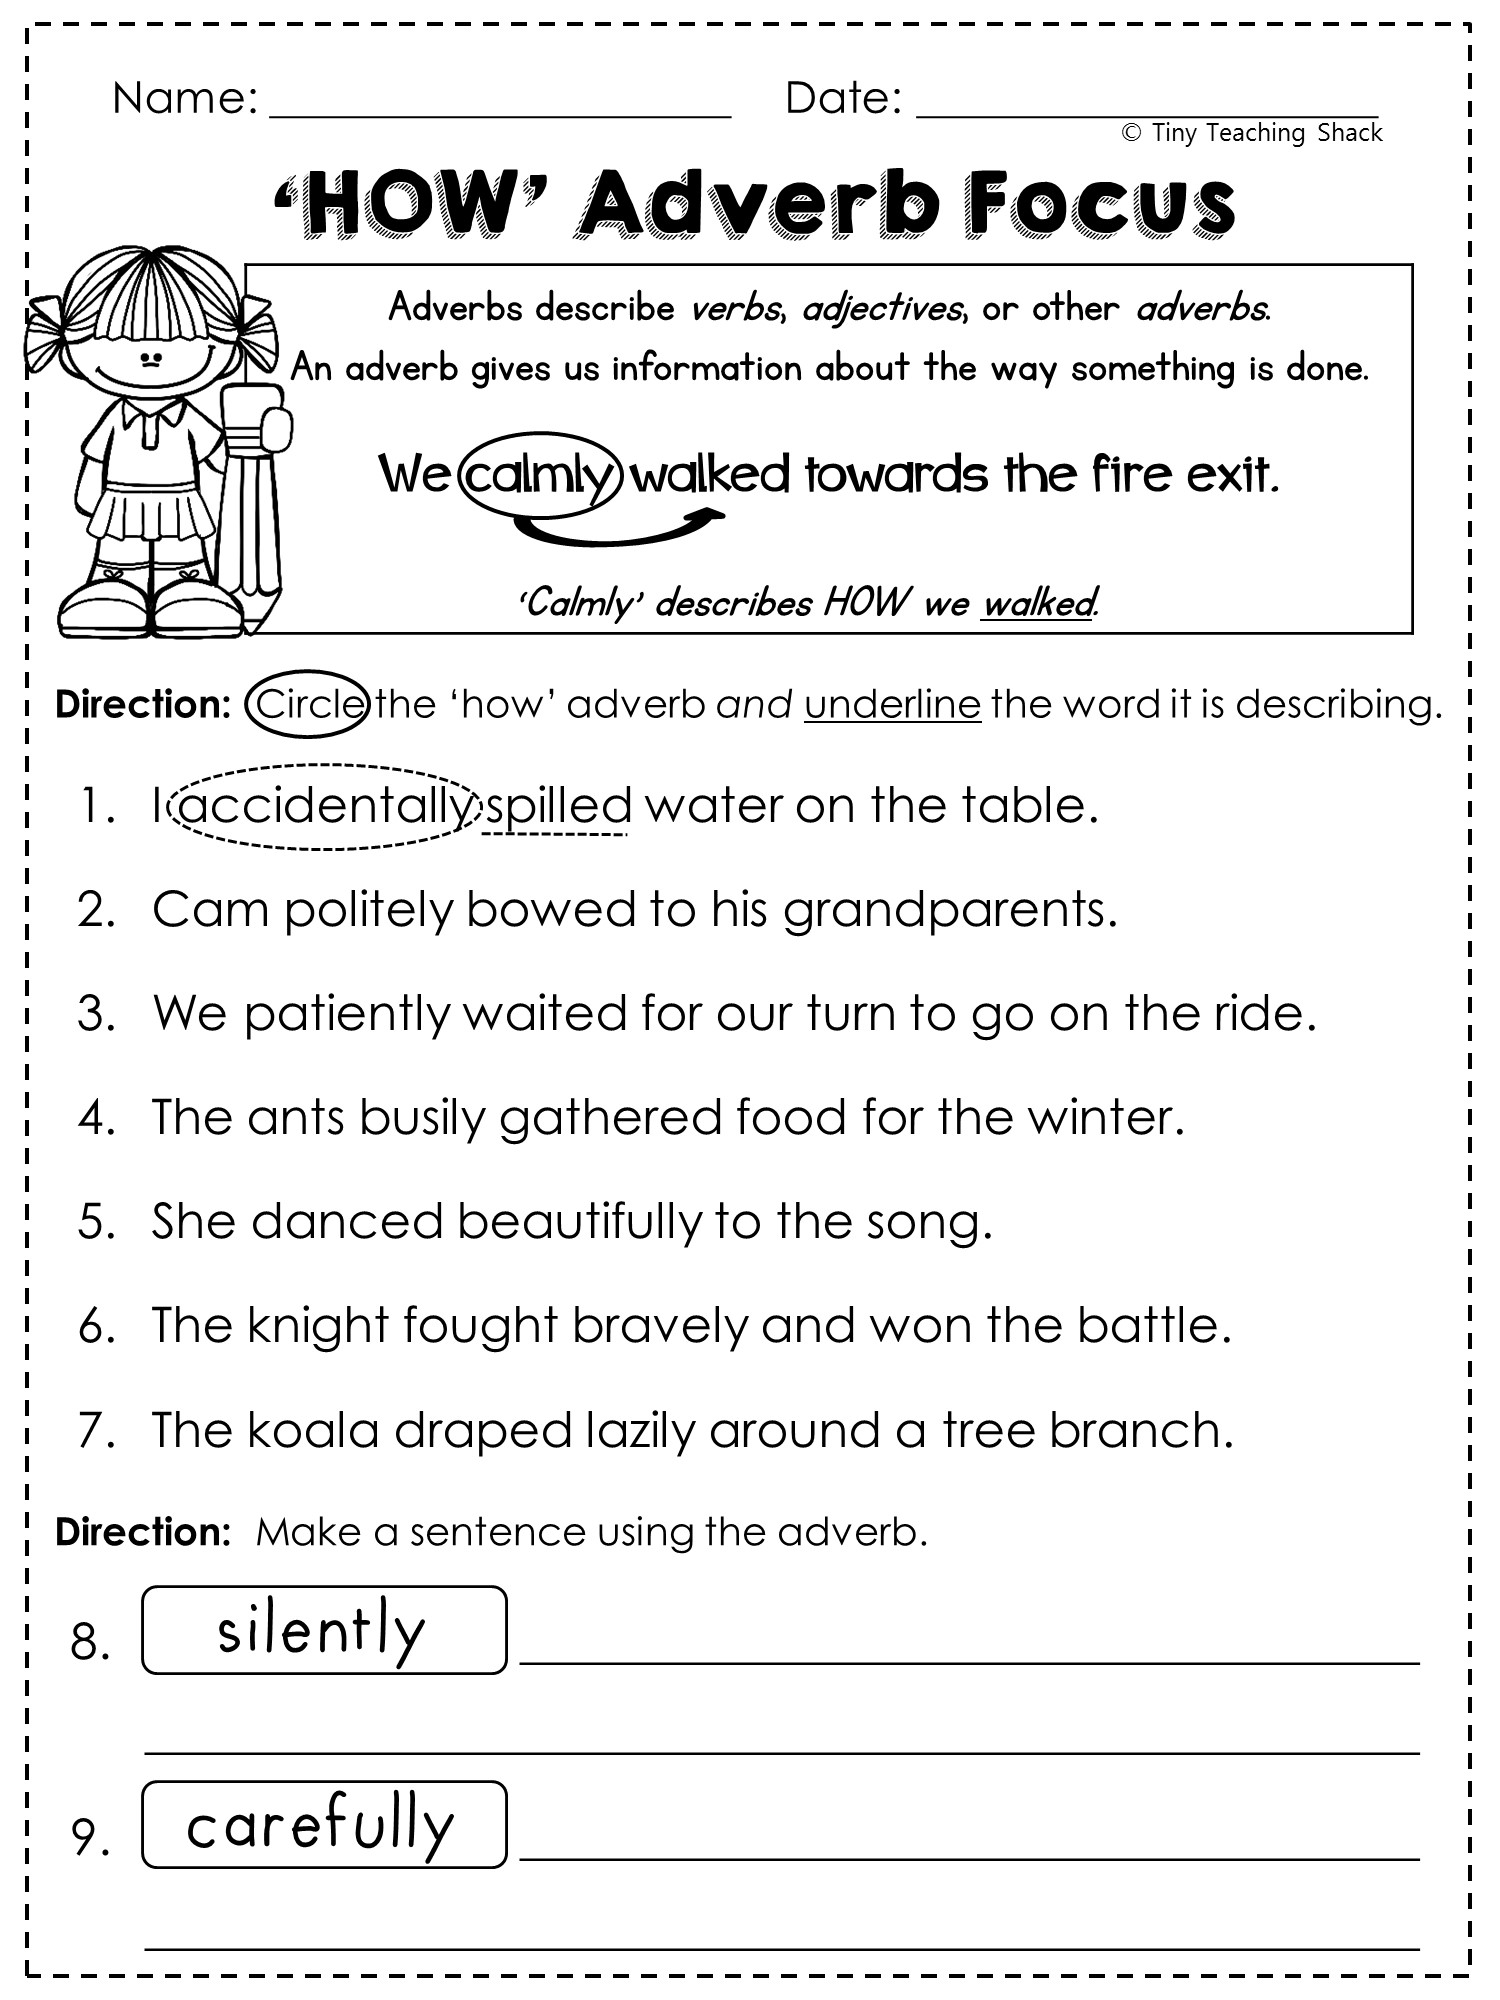 adverbs-worksheets-for-grade-2